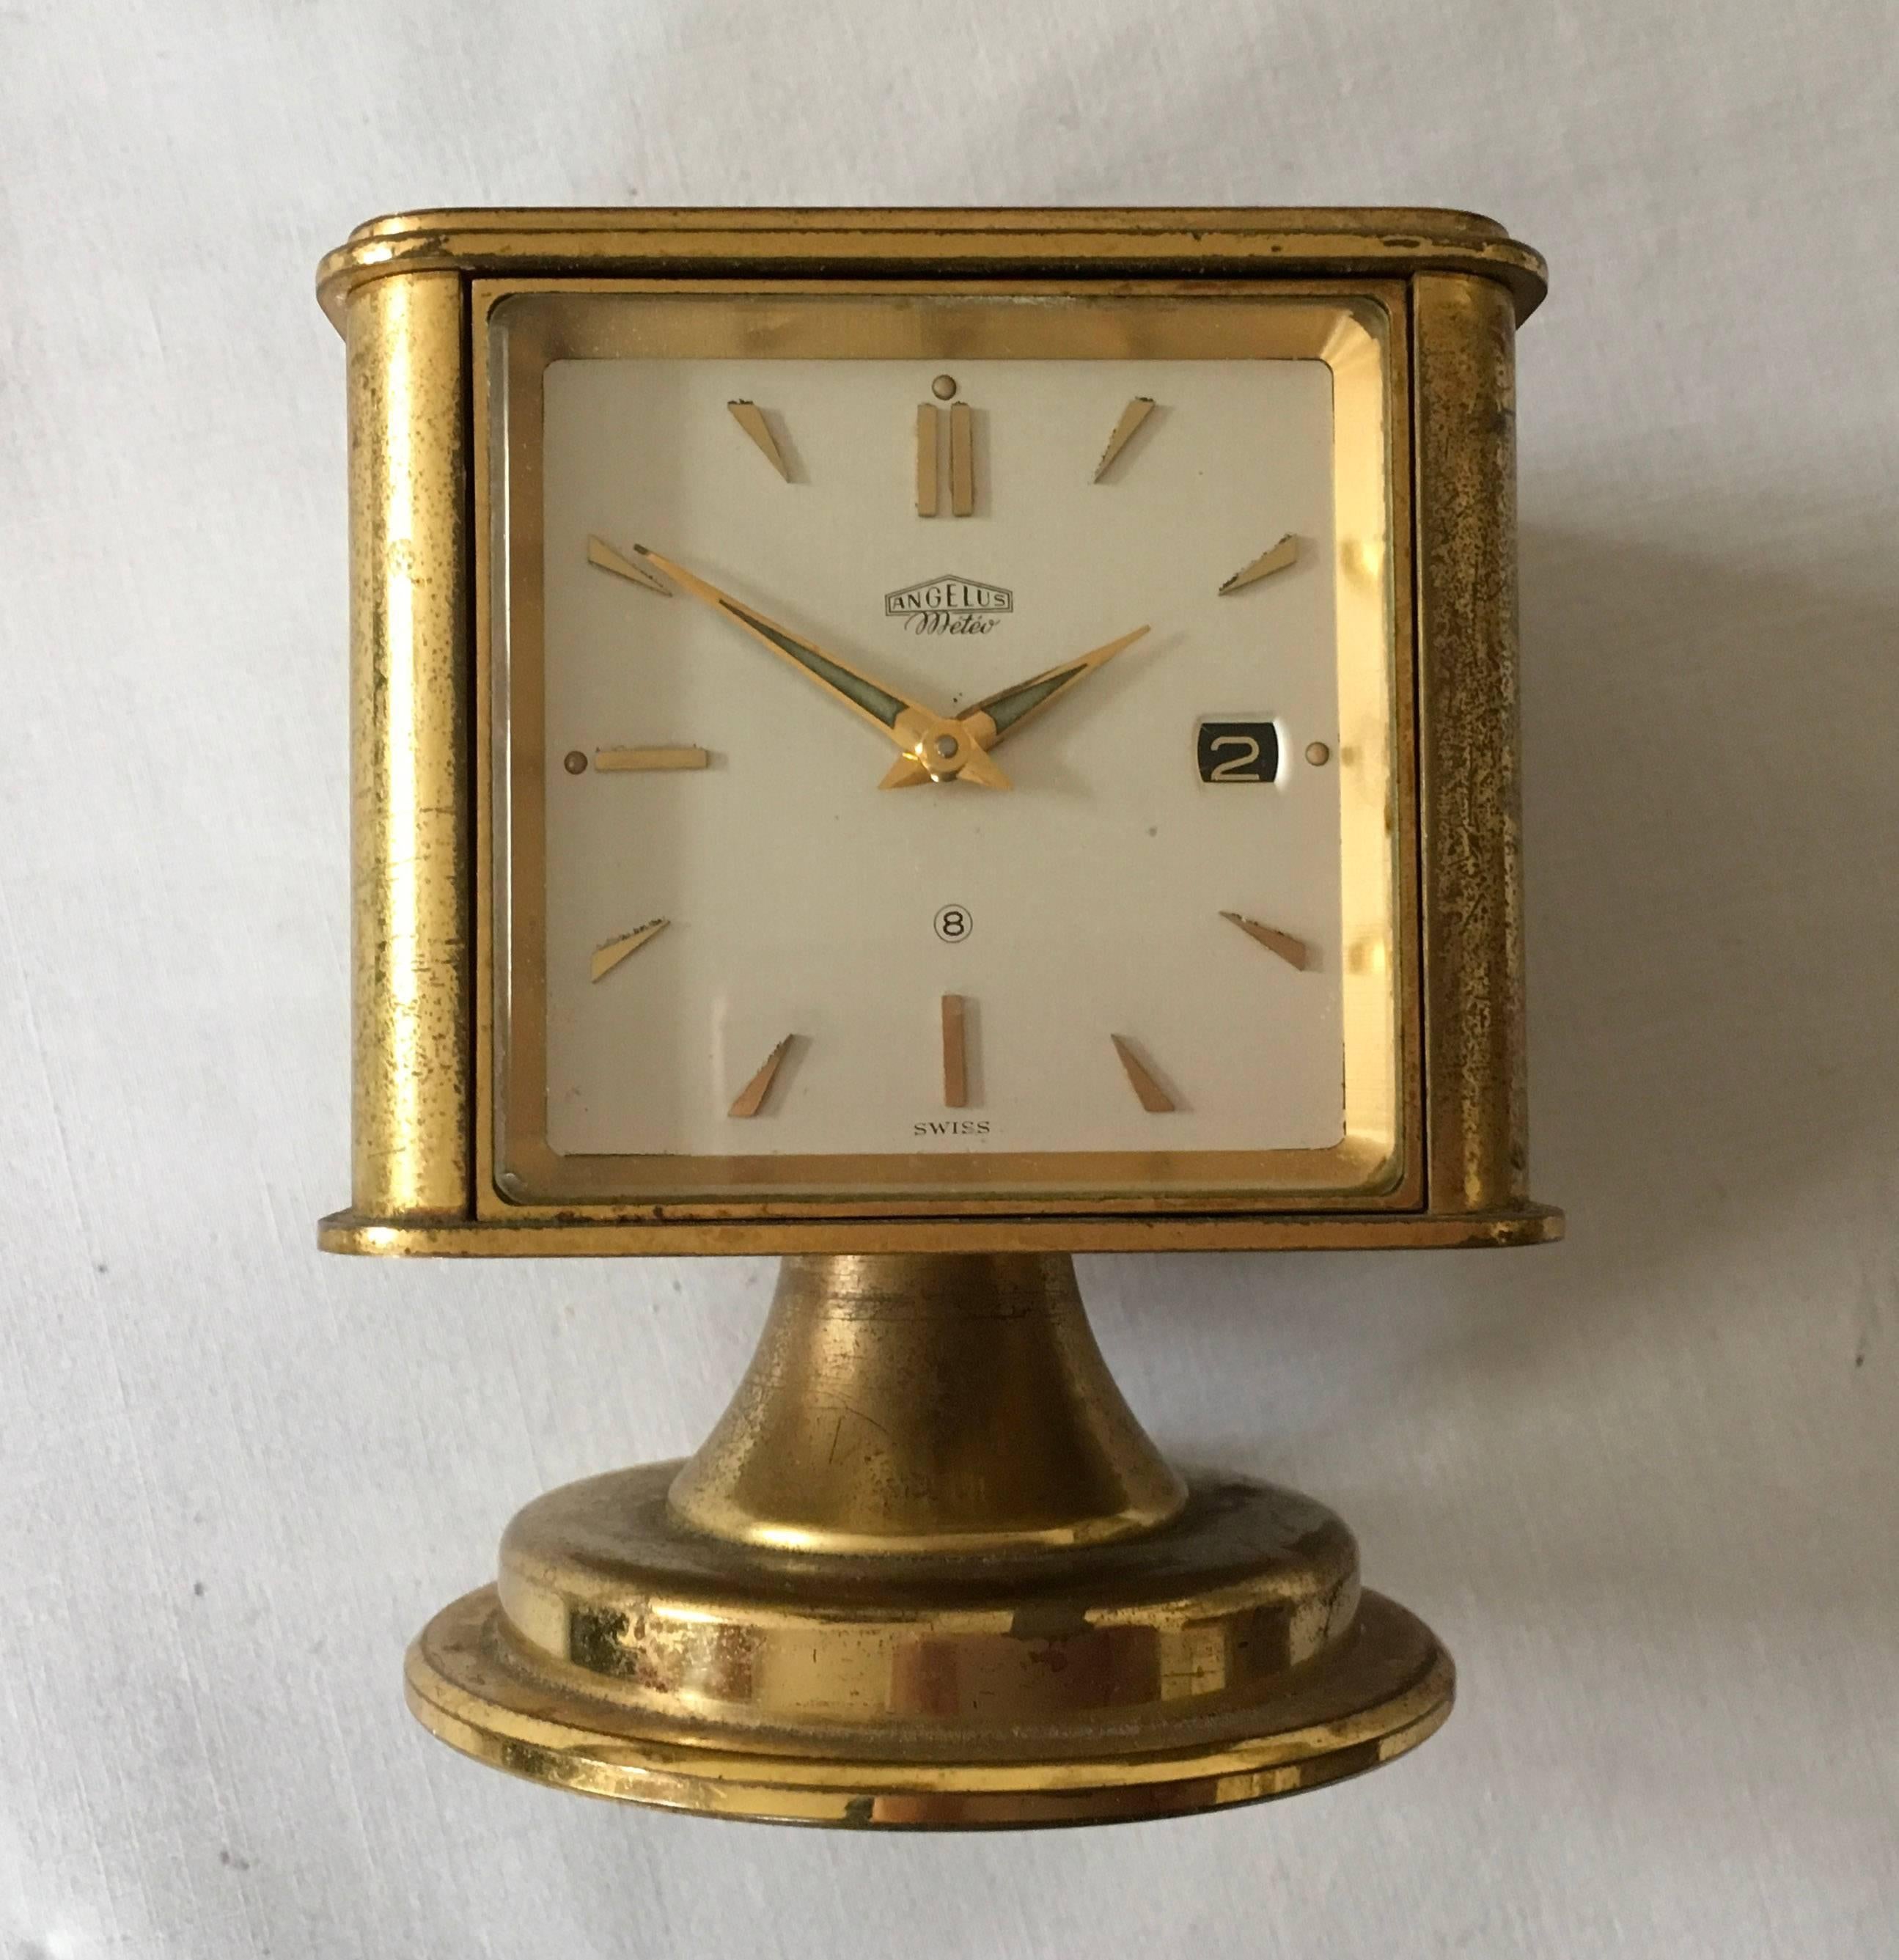 Brass construction with 8 days movement desk clock, Celsius or Fahrenheit thermometer, barometer, hygrometer, and compass.
Made in the 1930s in Switzerland by Angelus Meteo Watch Company.
Original working condition with some patina on the brass